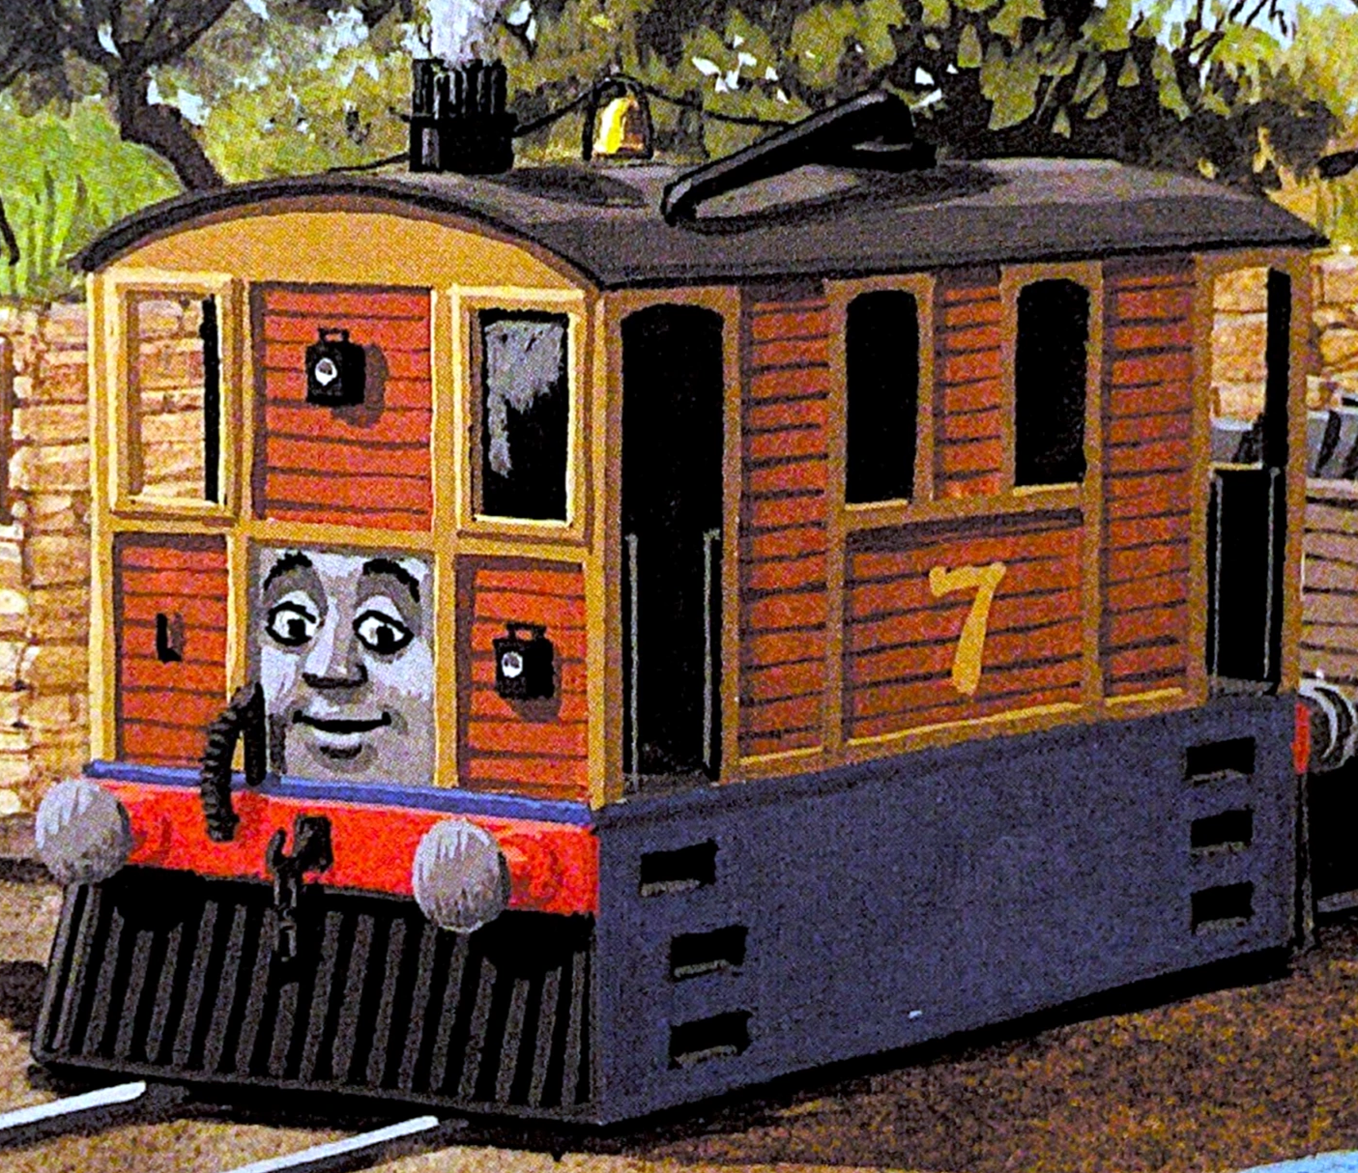 toby thomas the tank engine toy